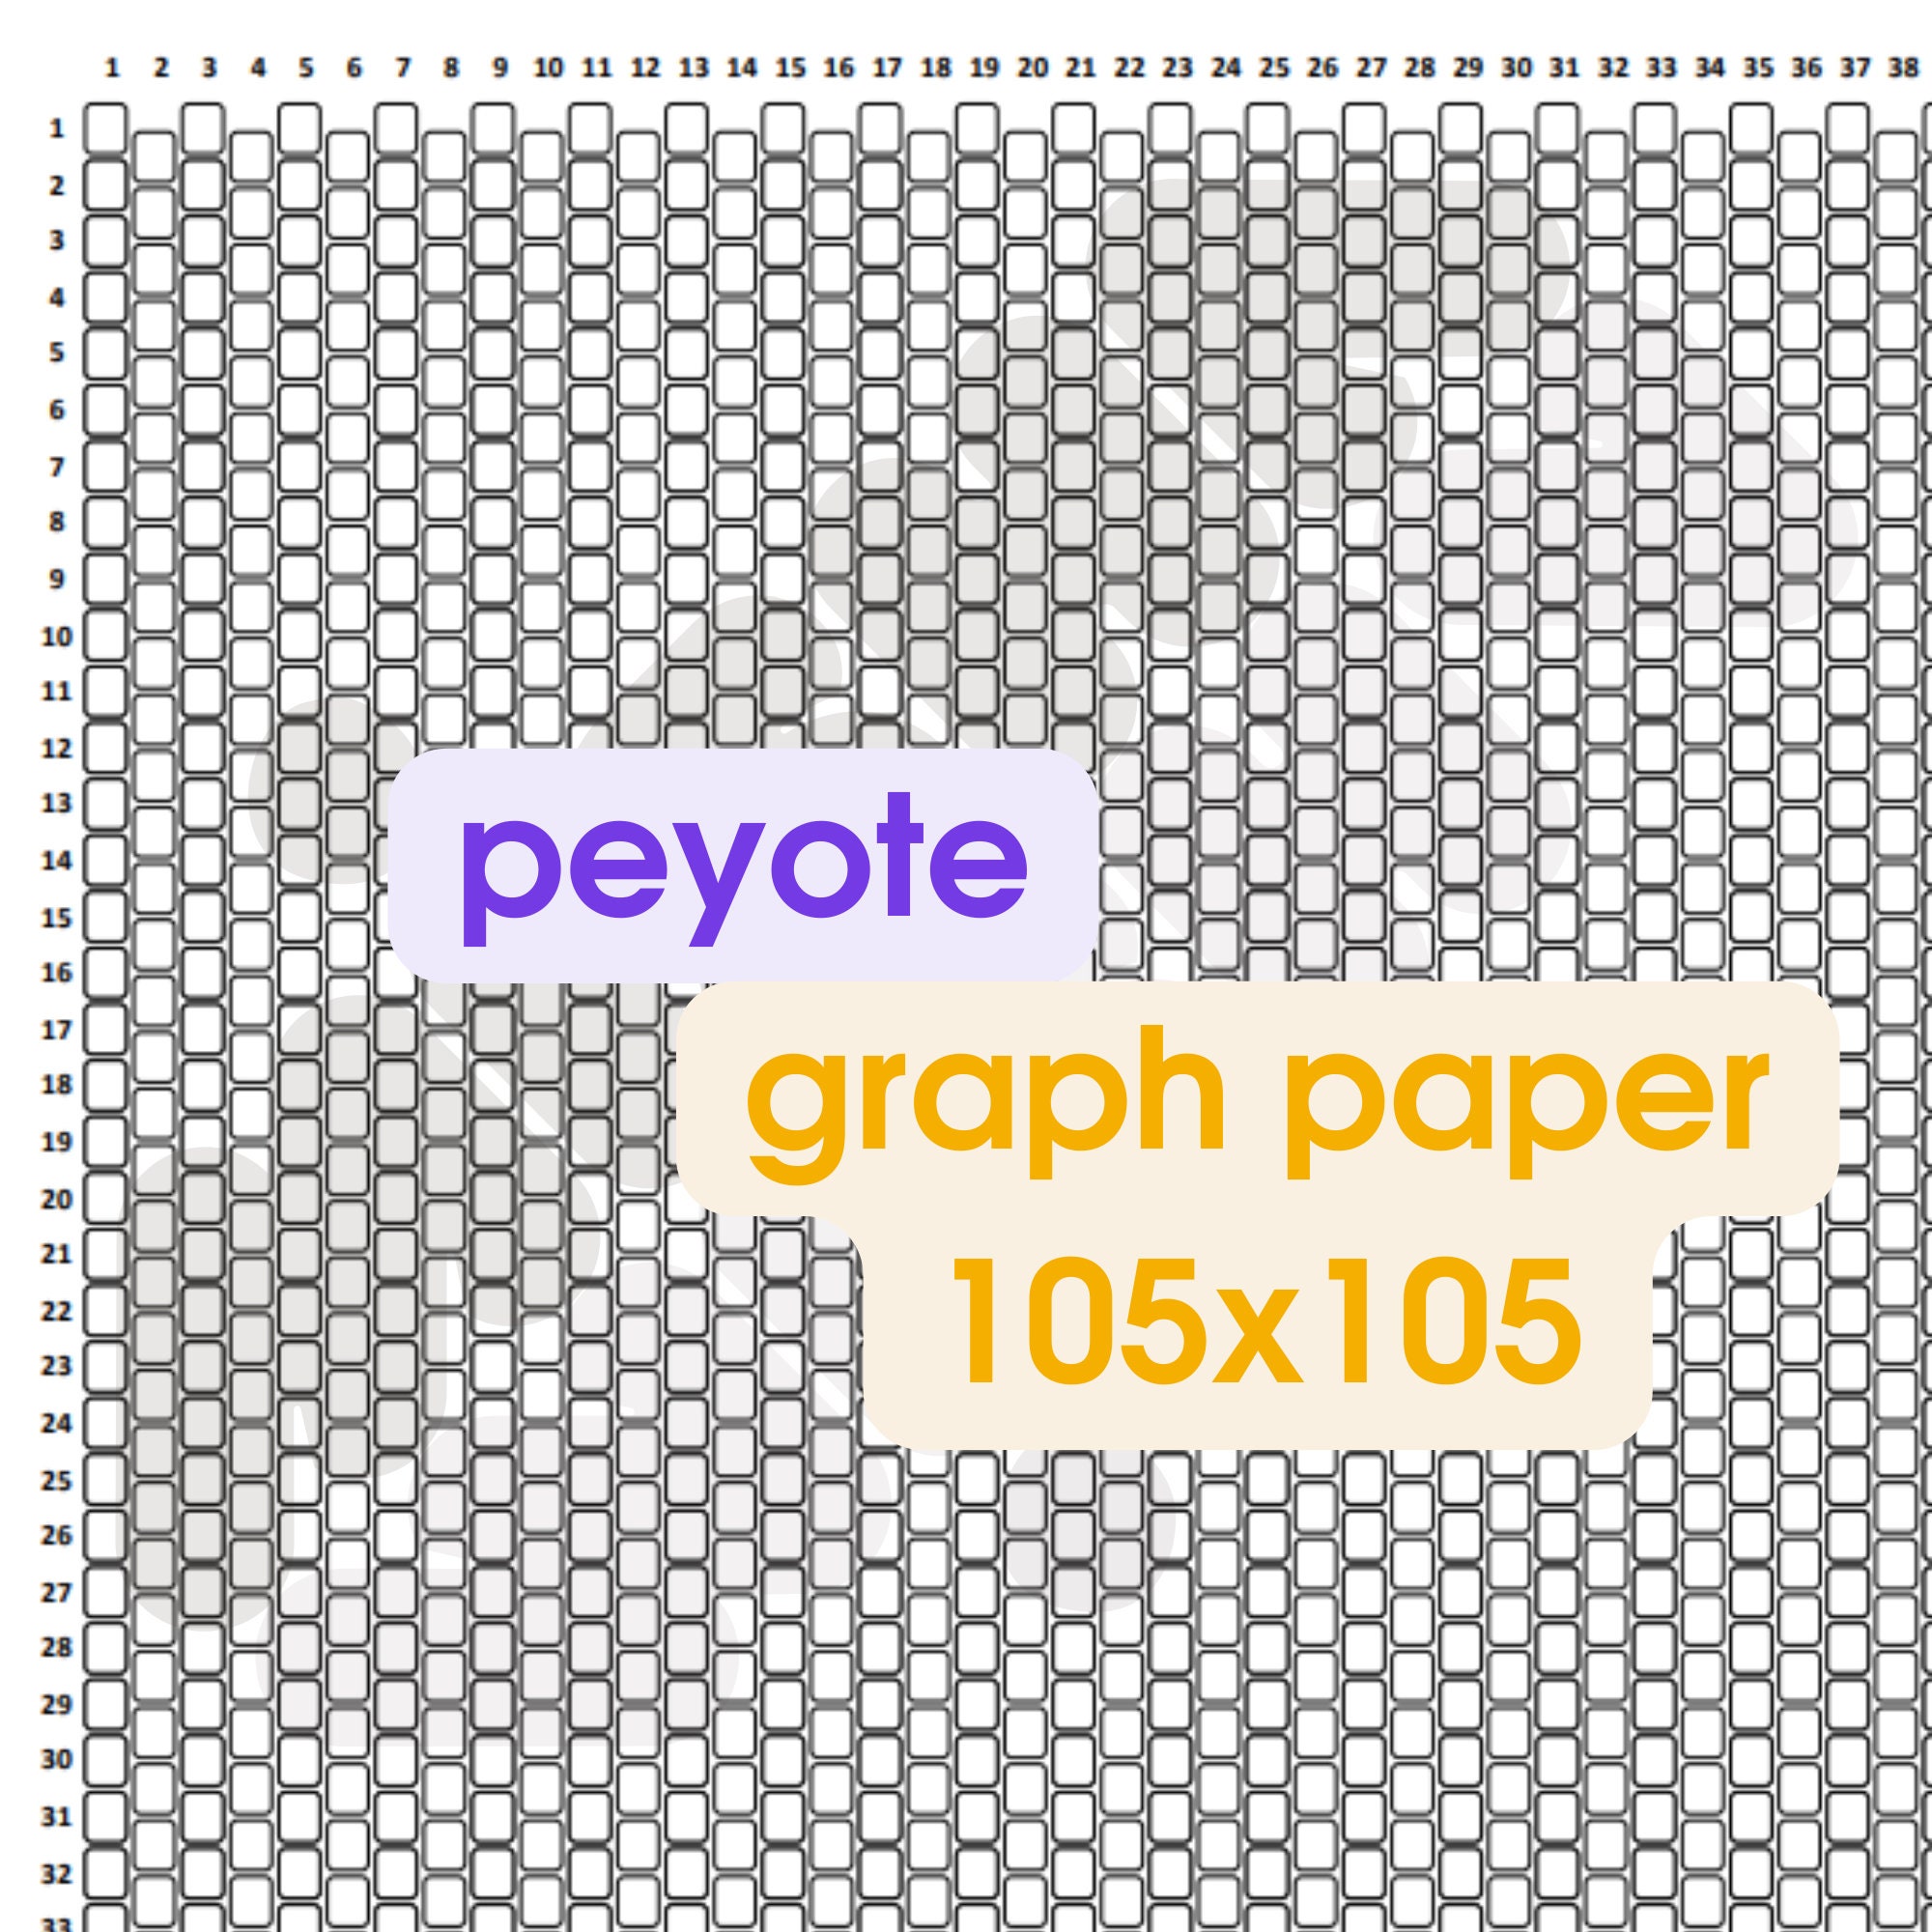 10 Pack of Large Sheet Format 1/4 Graph Paper 36 X 24 Blue Lines 